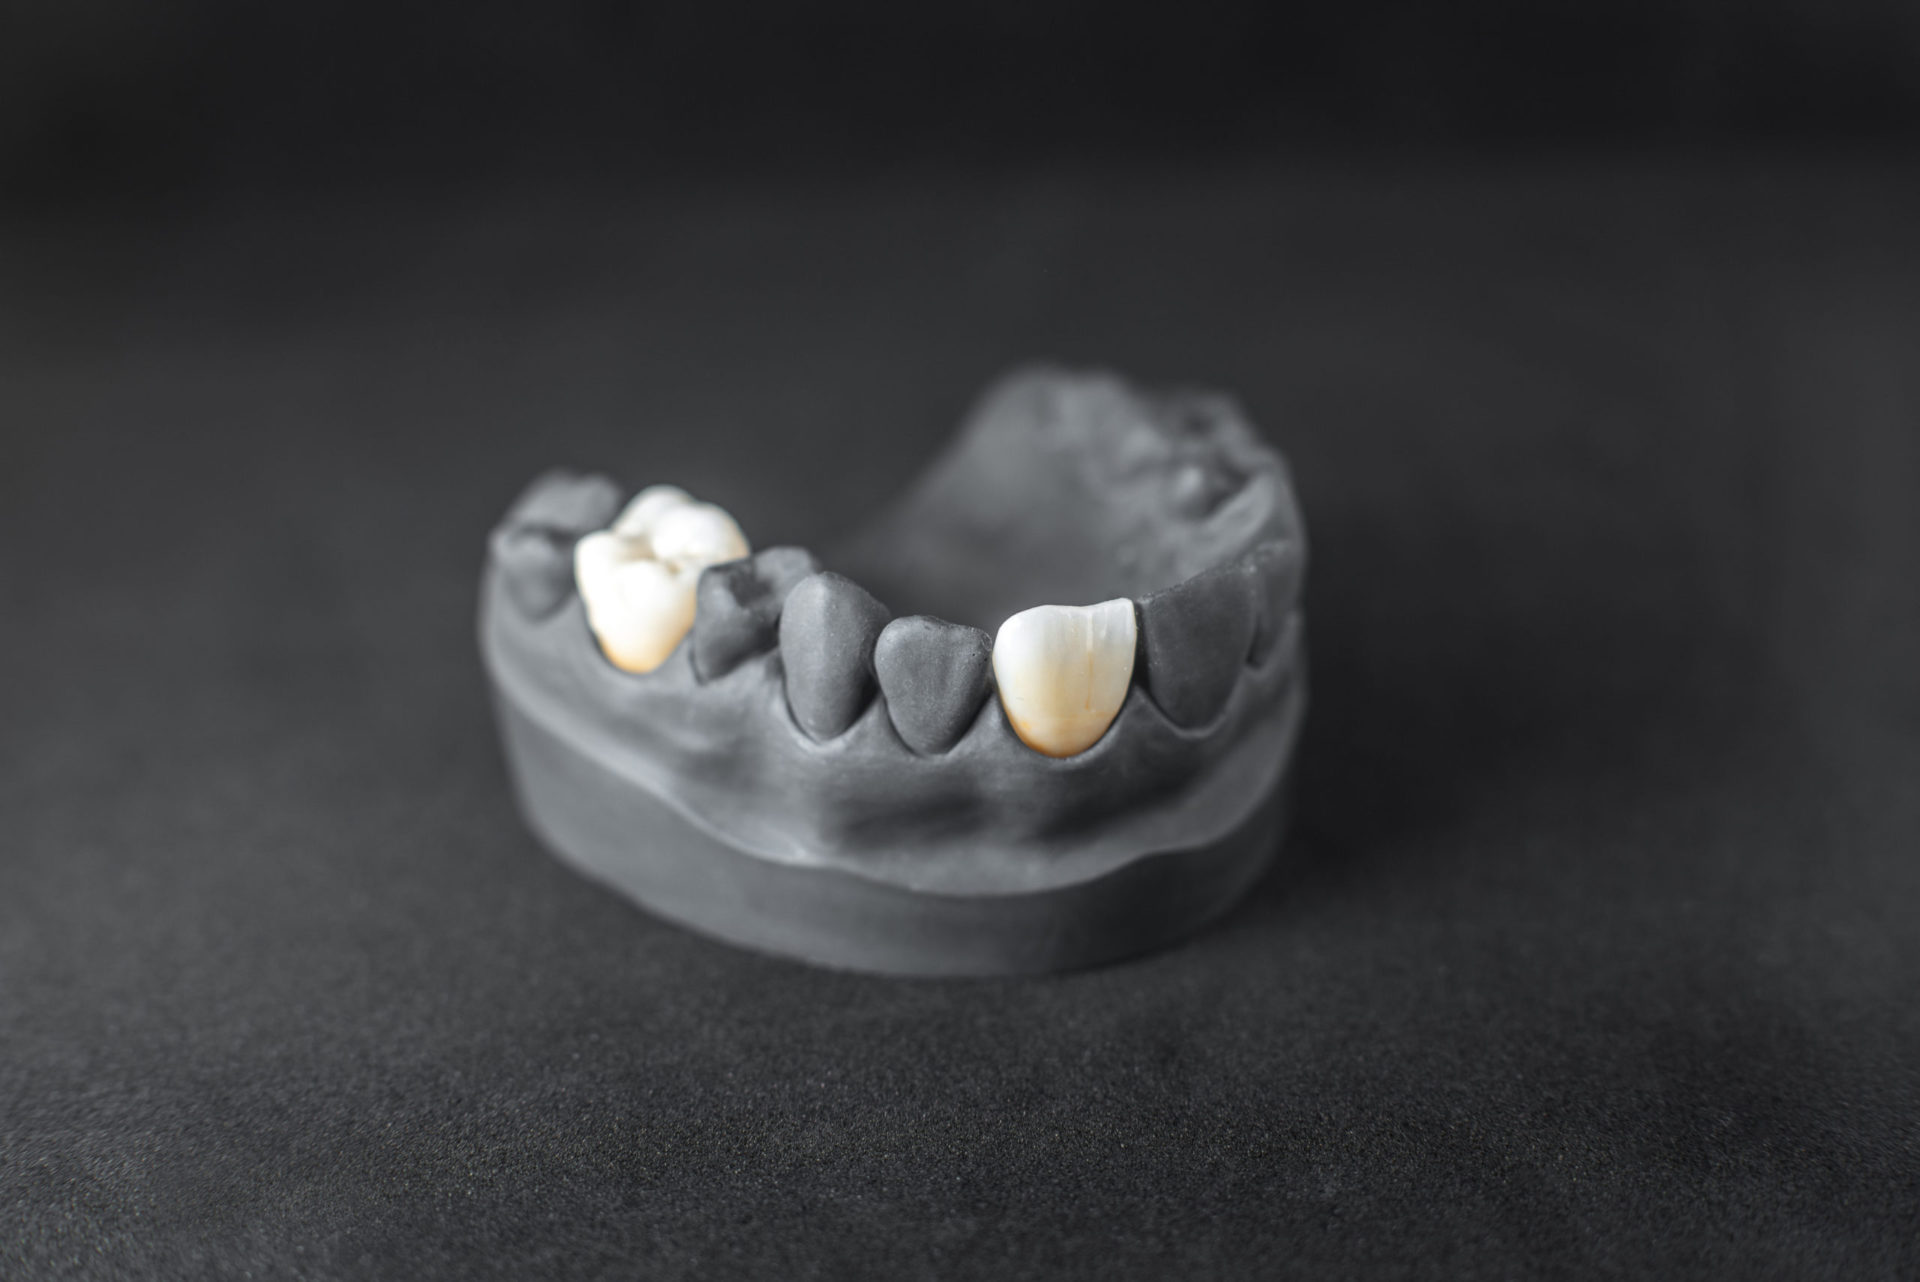 model of artificial jaw with dental implant 2021 09 01 14 47 40 utc scaled